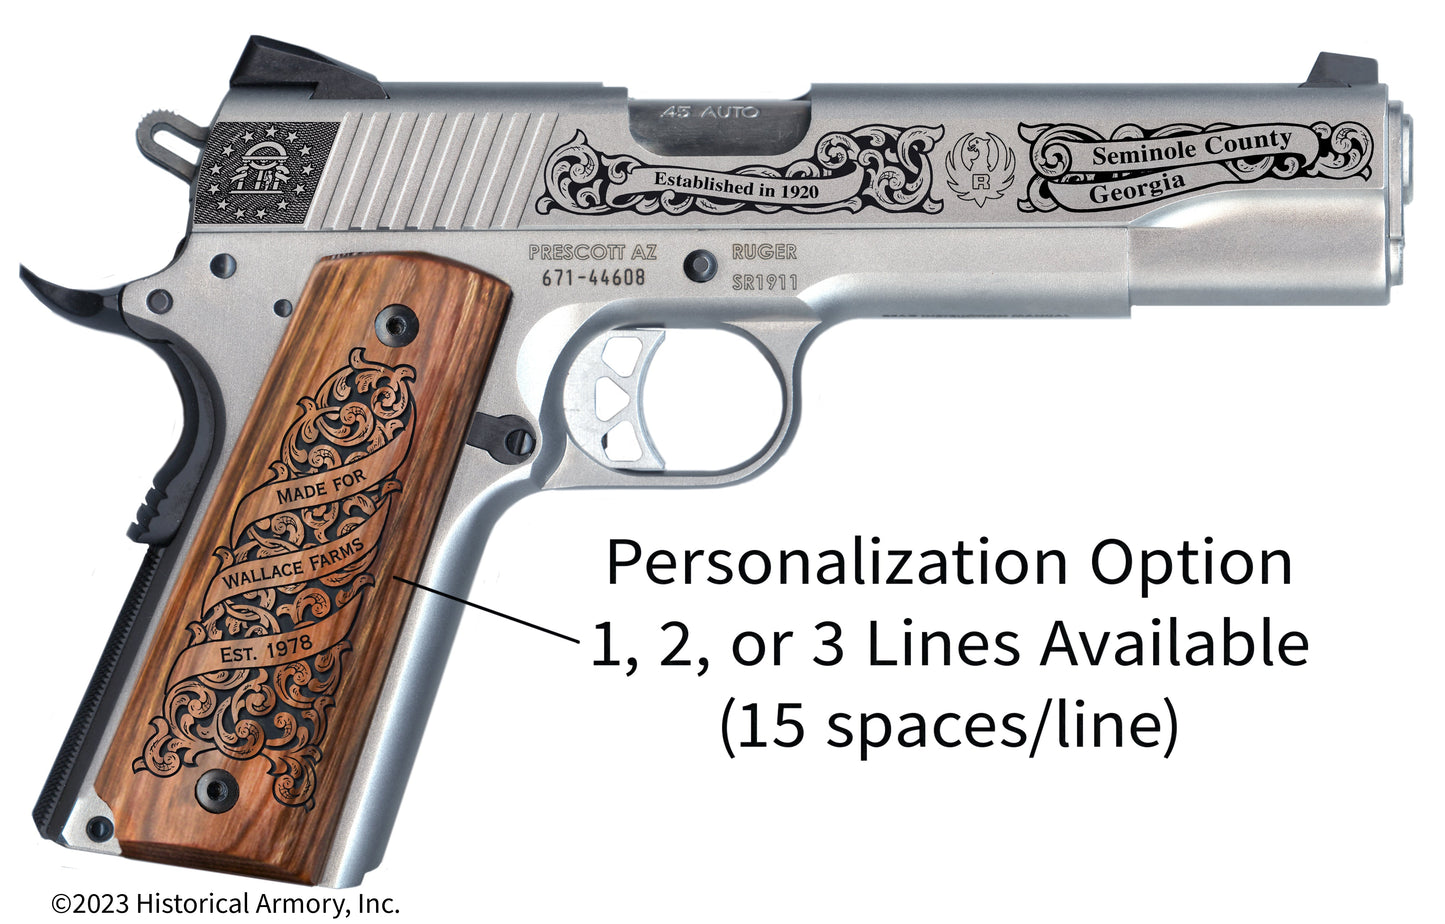 Seminole County Georgia Personalized Engraved .45 Auto Ruger 1911